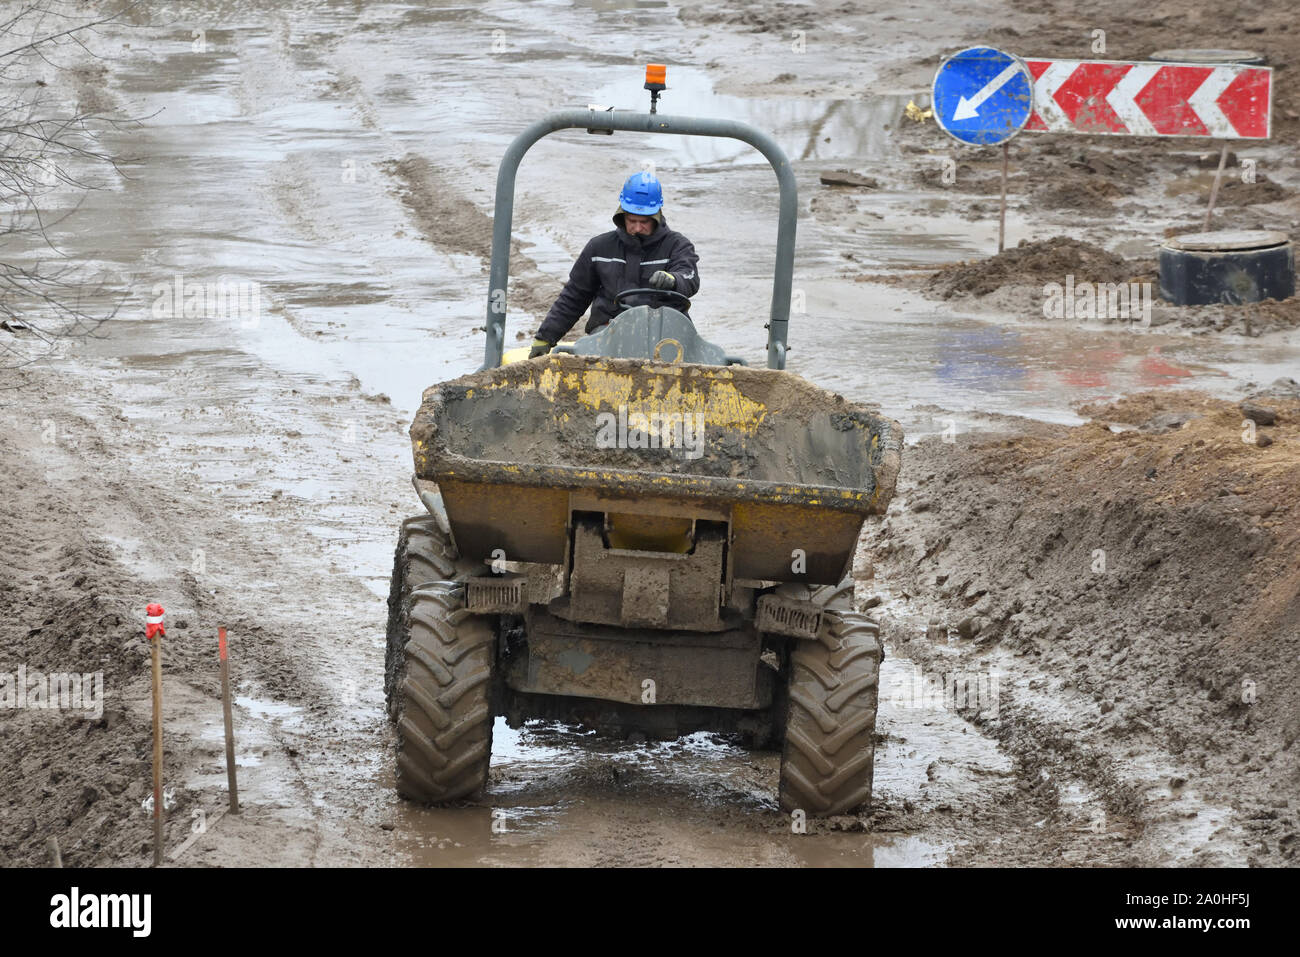 Vilnius, Lithuania - February 16: Small Dump Truck hauling ground during road construction on February 16, 2019. Vilnius is the capital of Lithuania a Stock Photo